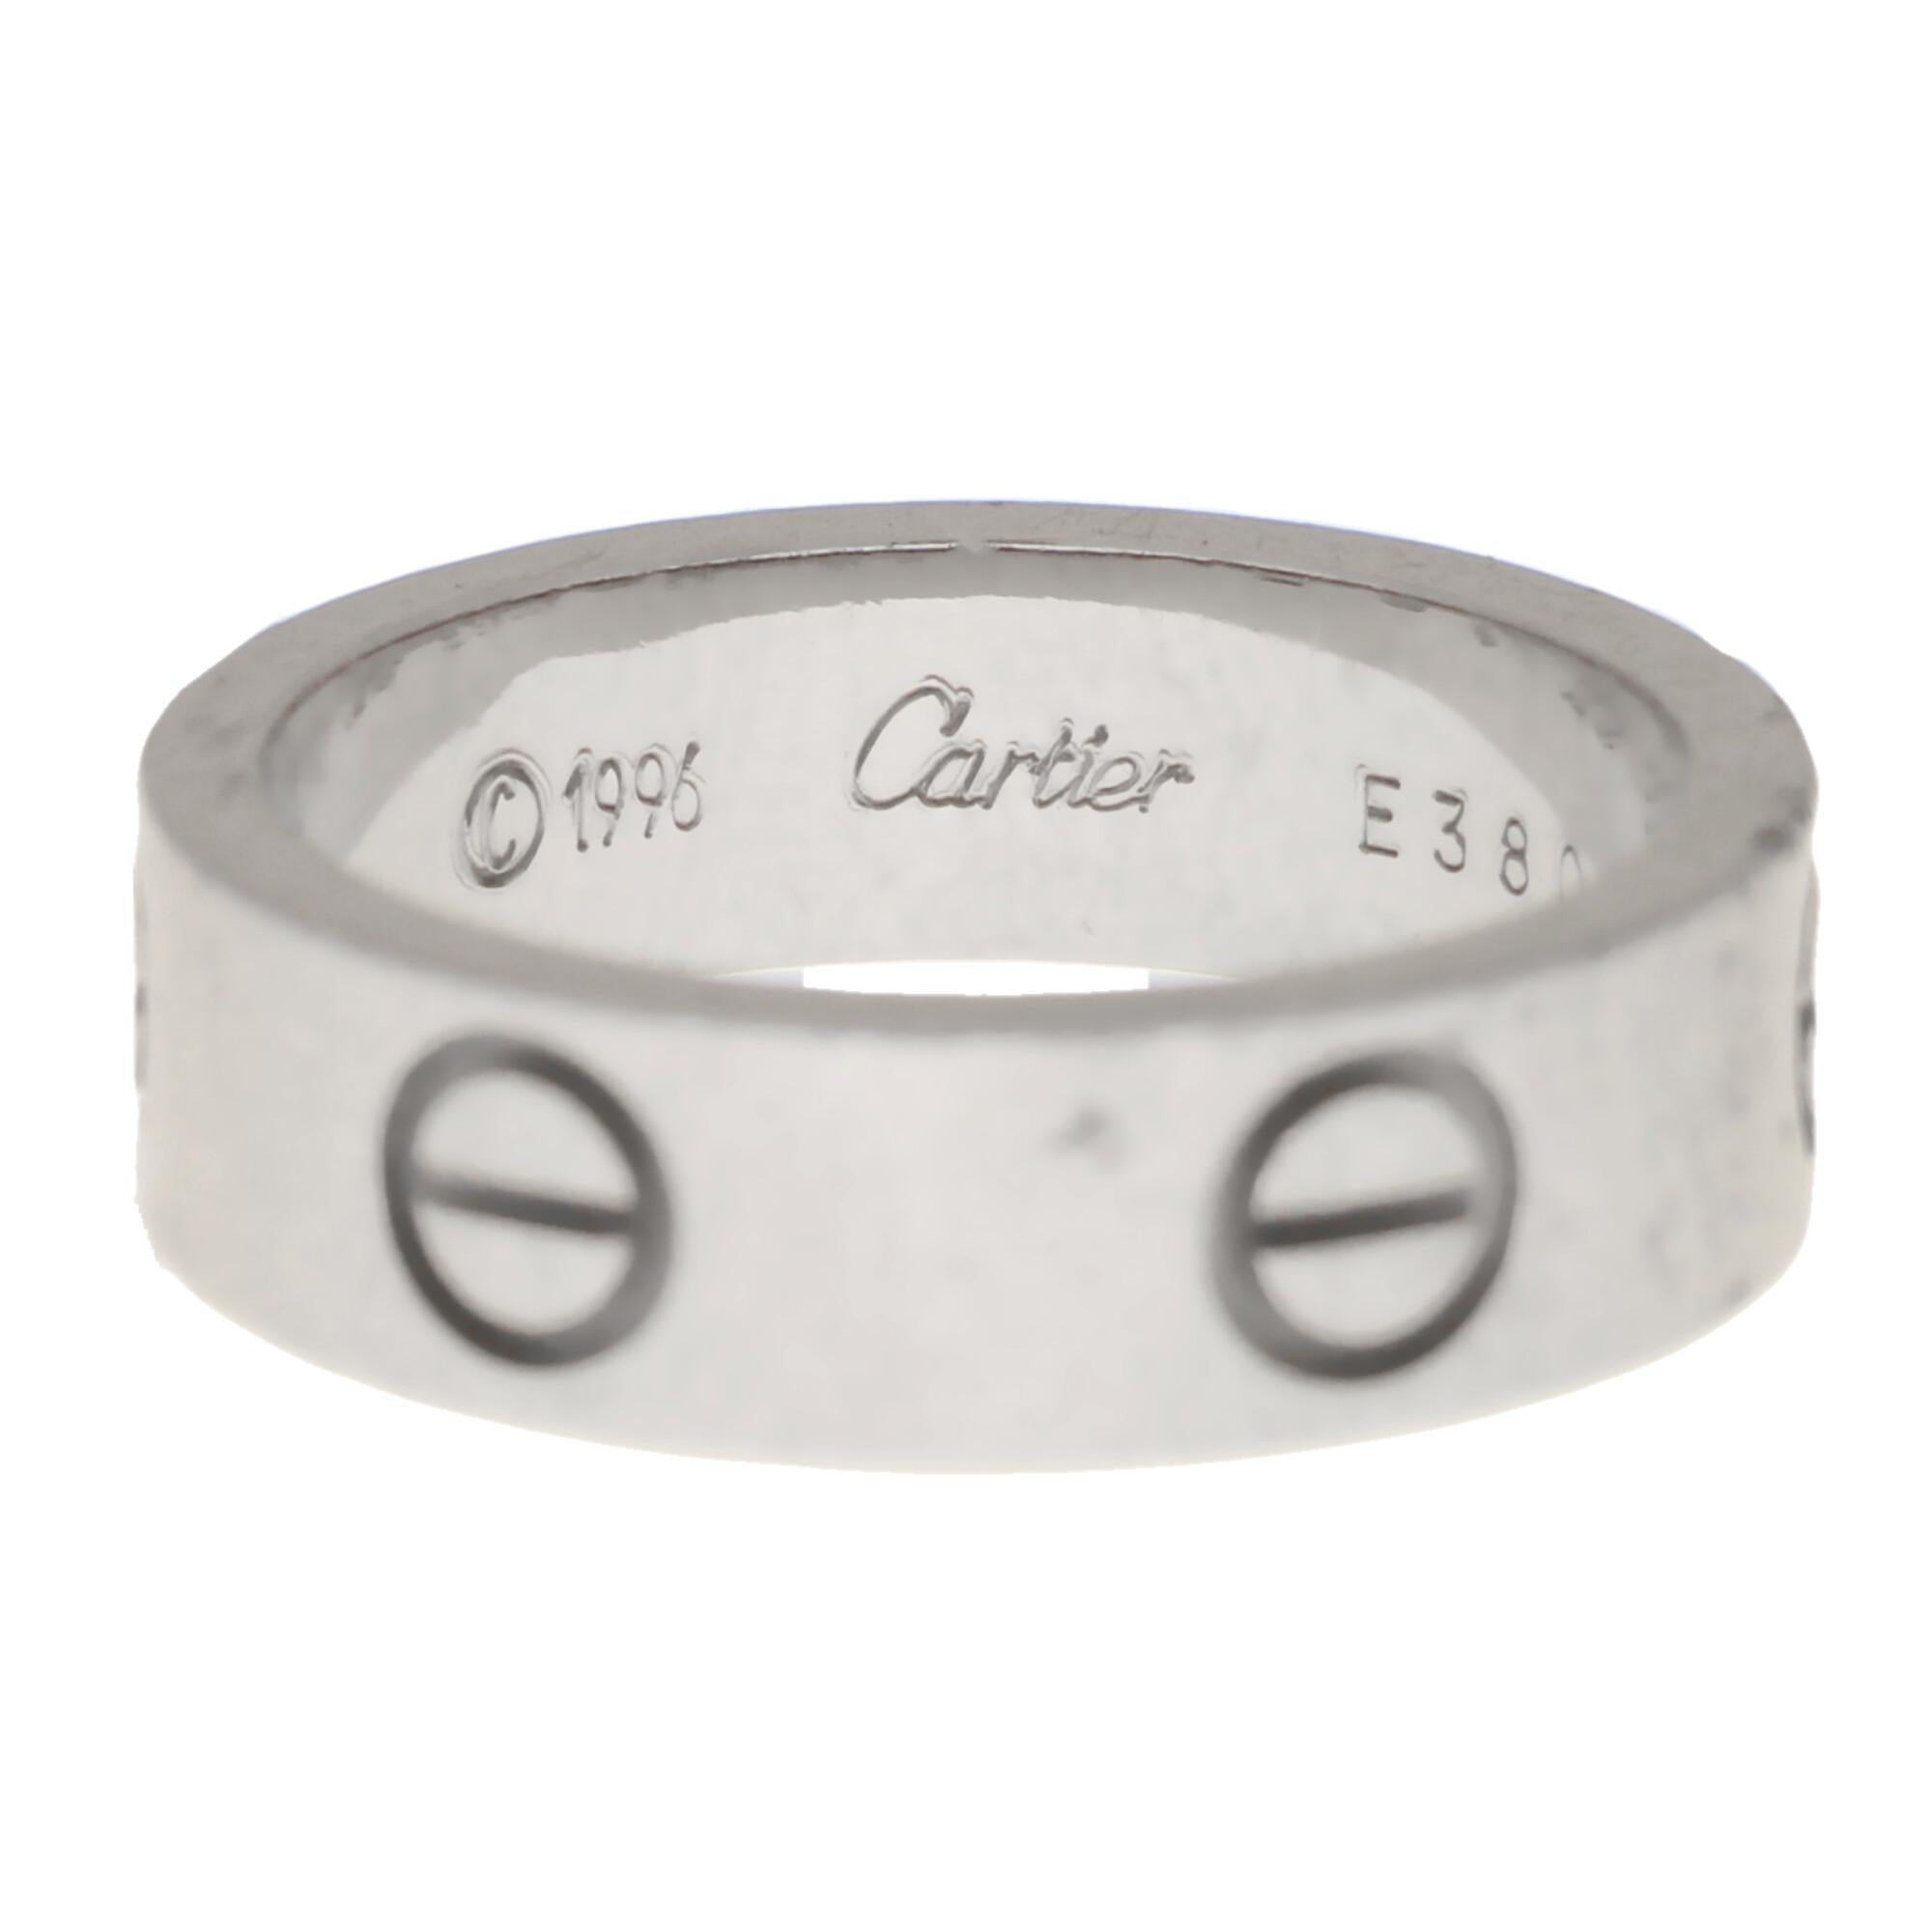 A classic Cartier Love ring set in 18k white gold.

The Love collection is a firm favorite of many mainly due to the simple yet beautiful design. The ring is composed of a 5.5-millimetre band with six individual nail motifs engraved within it. The